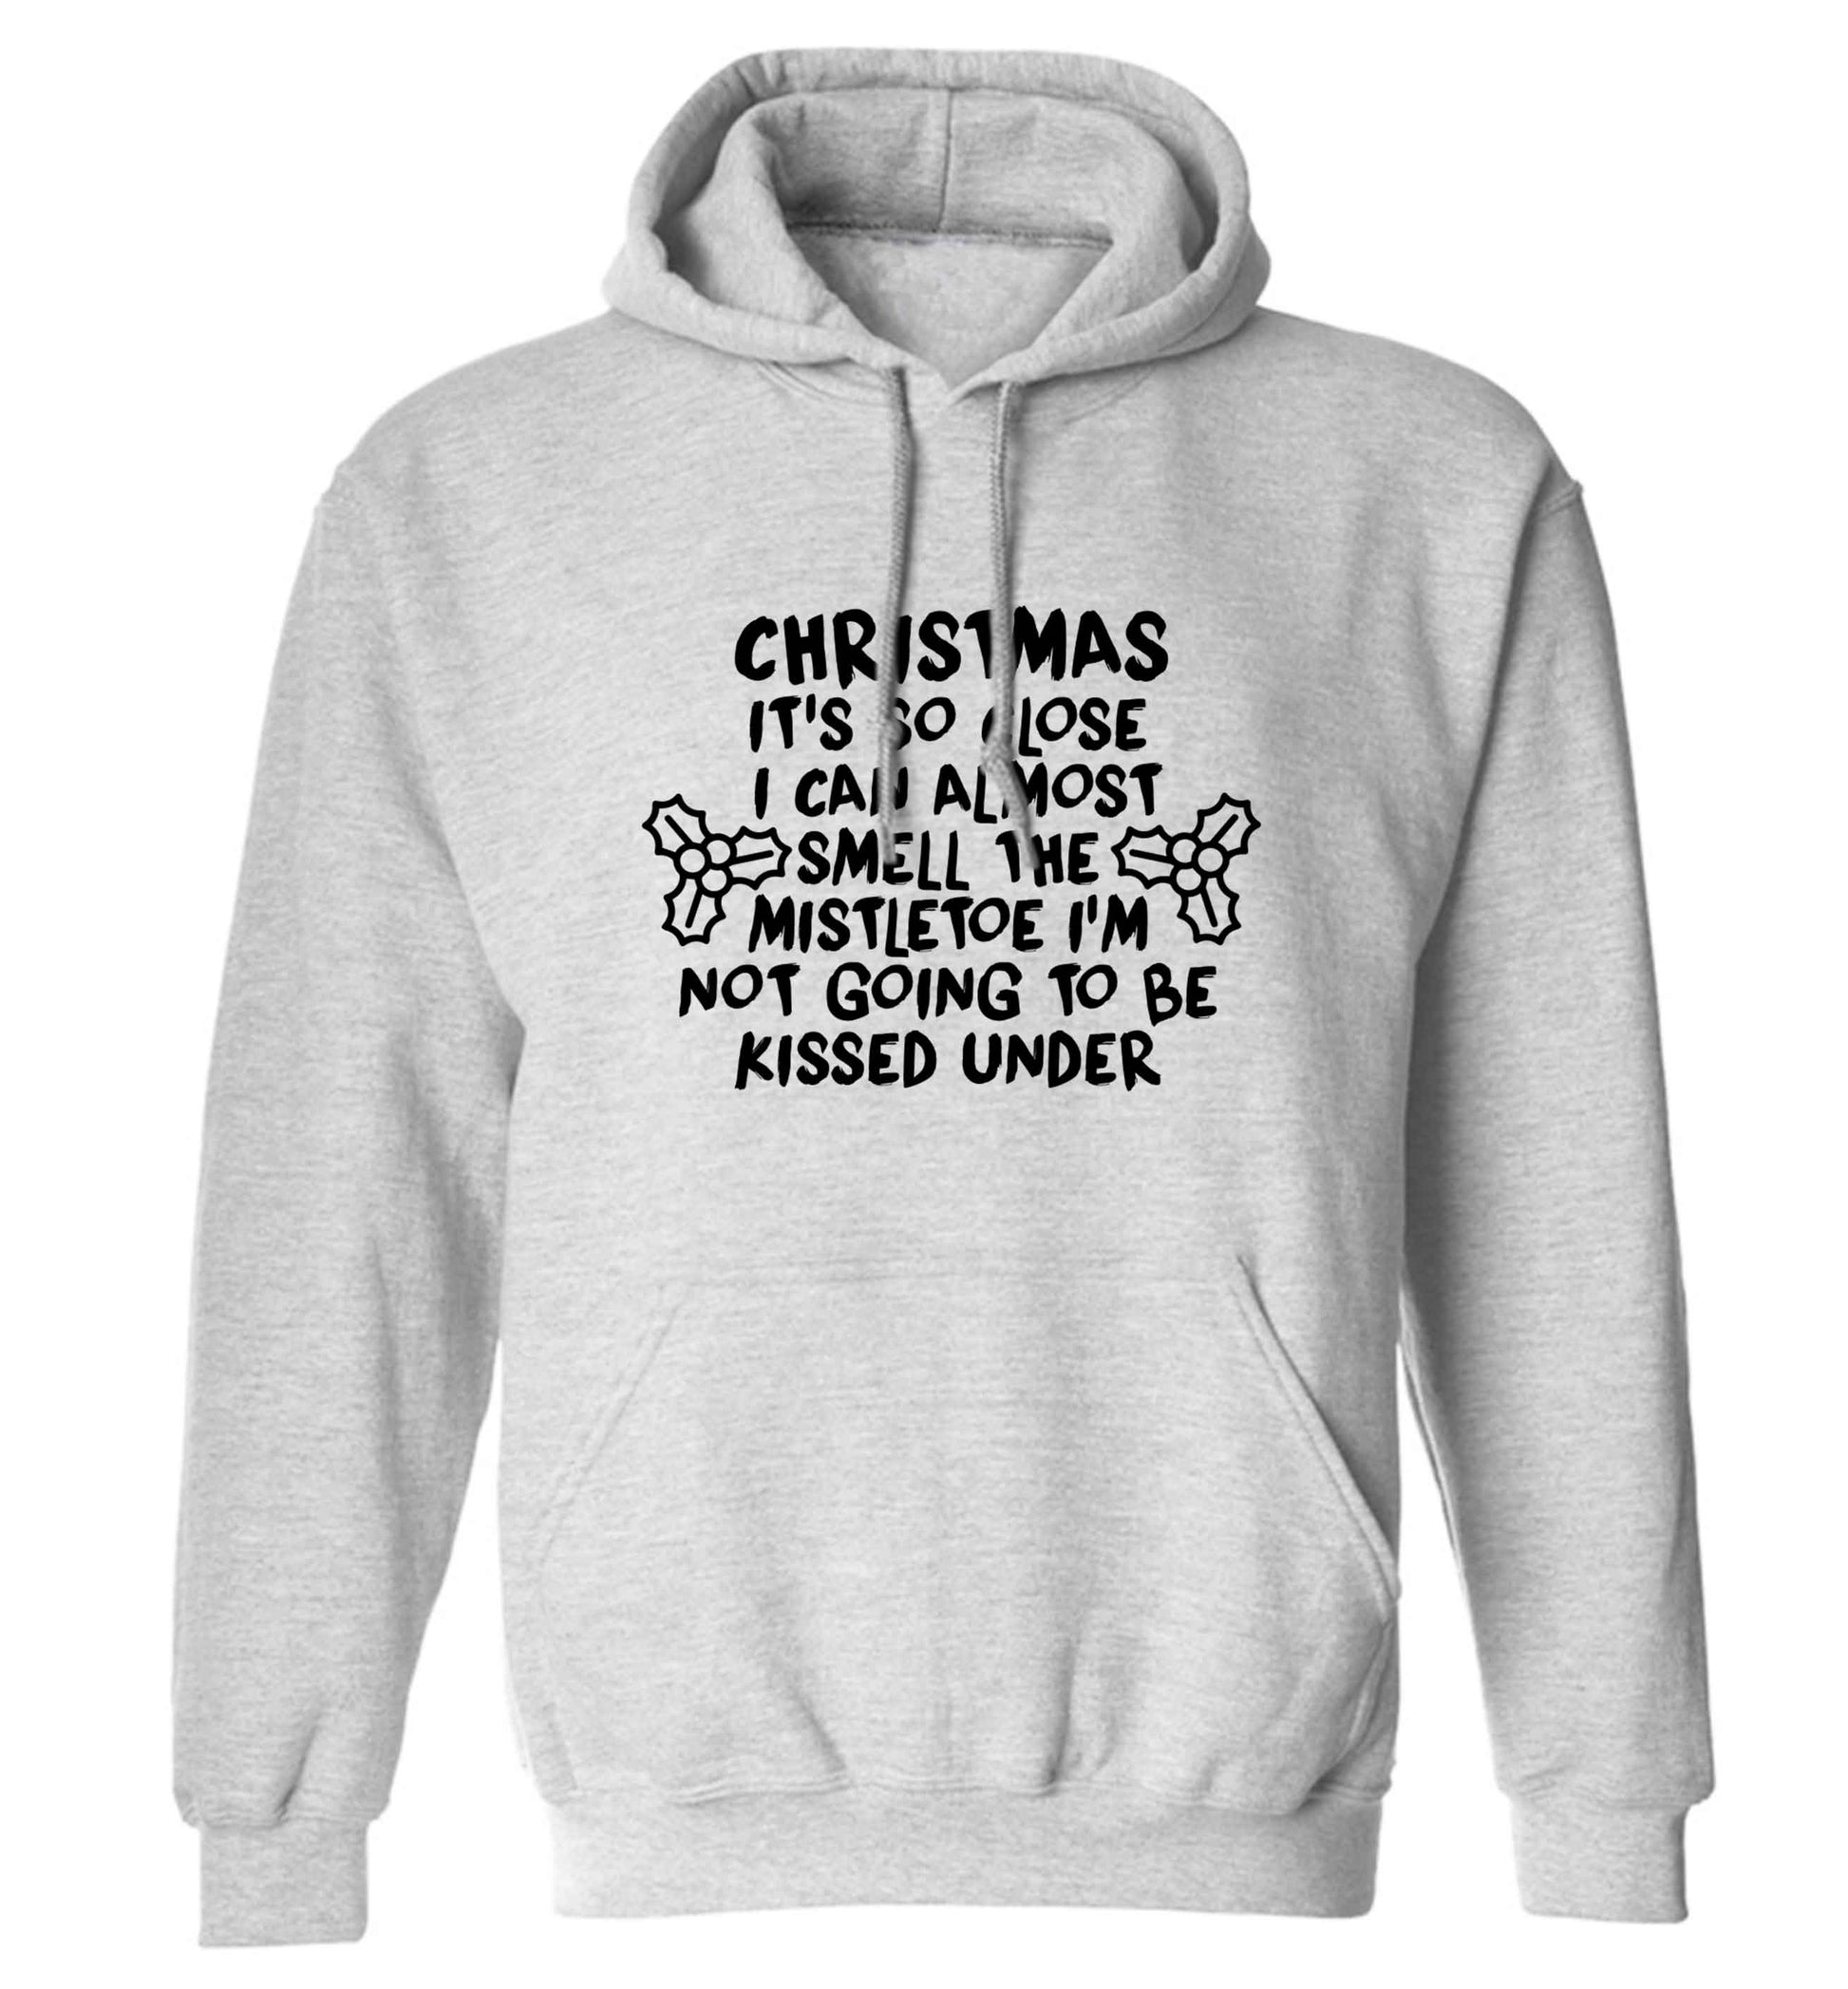 Christmas it's so close I can almost smell the misteltoe I'm not going to be kissed under adults unisex grey hoodie 2XL